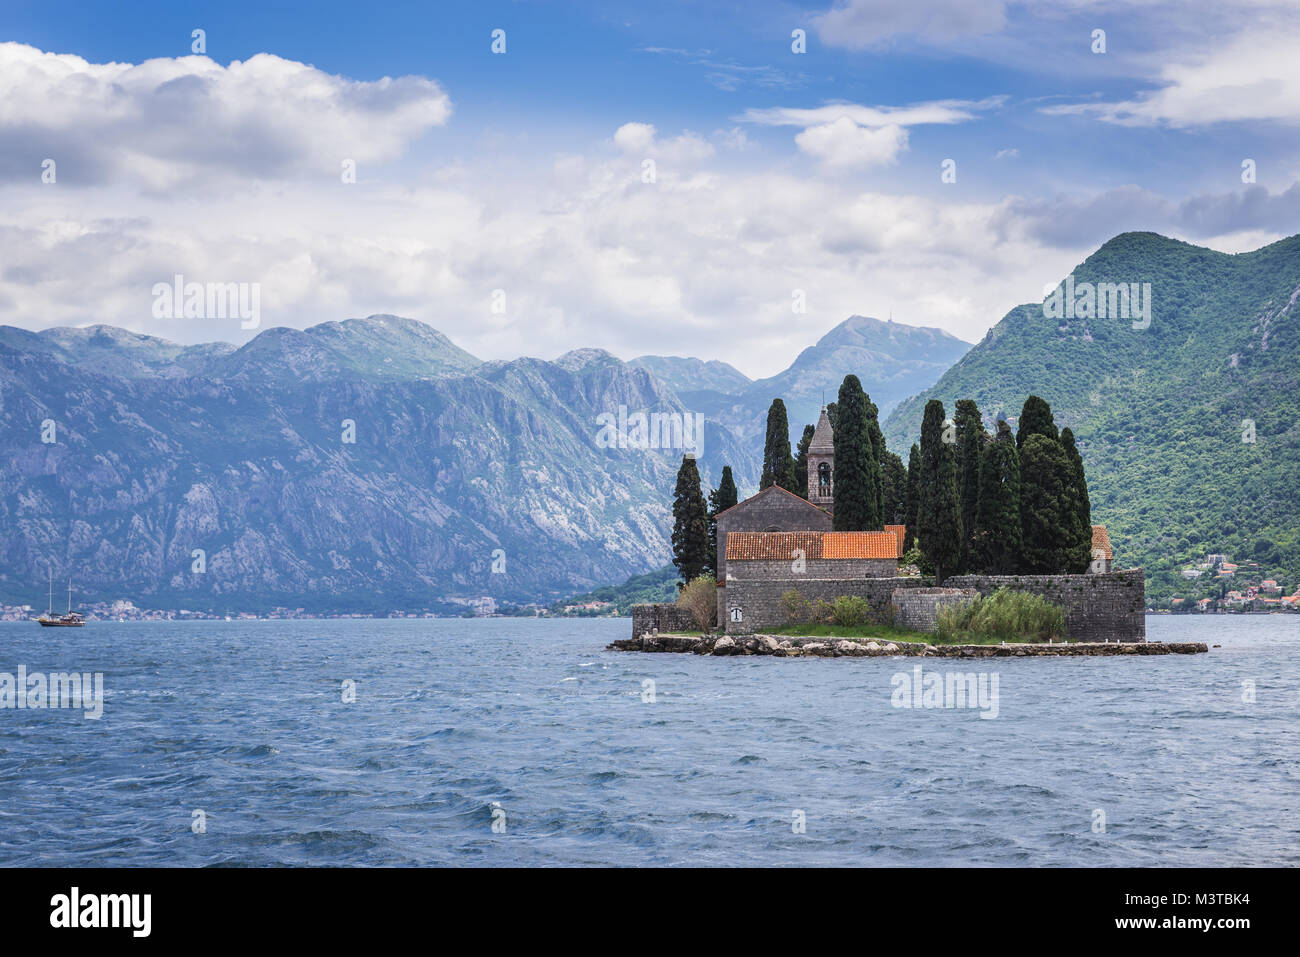 Island of Saint George , one of the two islets of the coast of Perast town in the Bay of Kotor, Montenegro Stock Photo